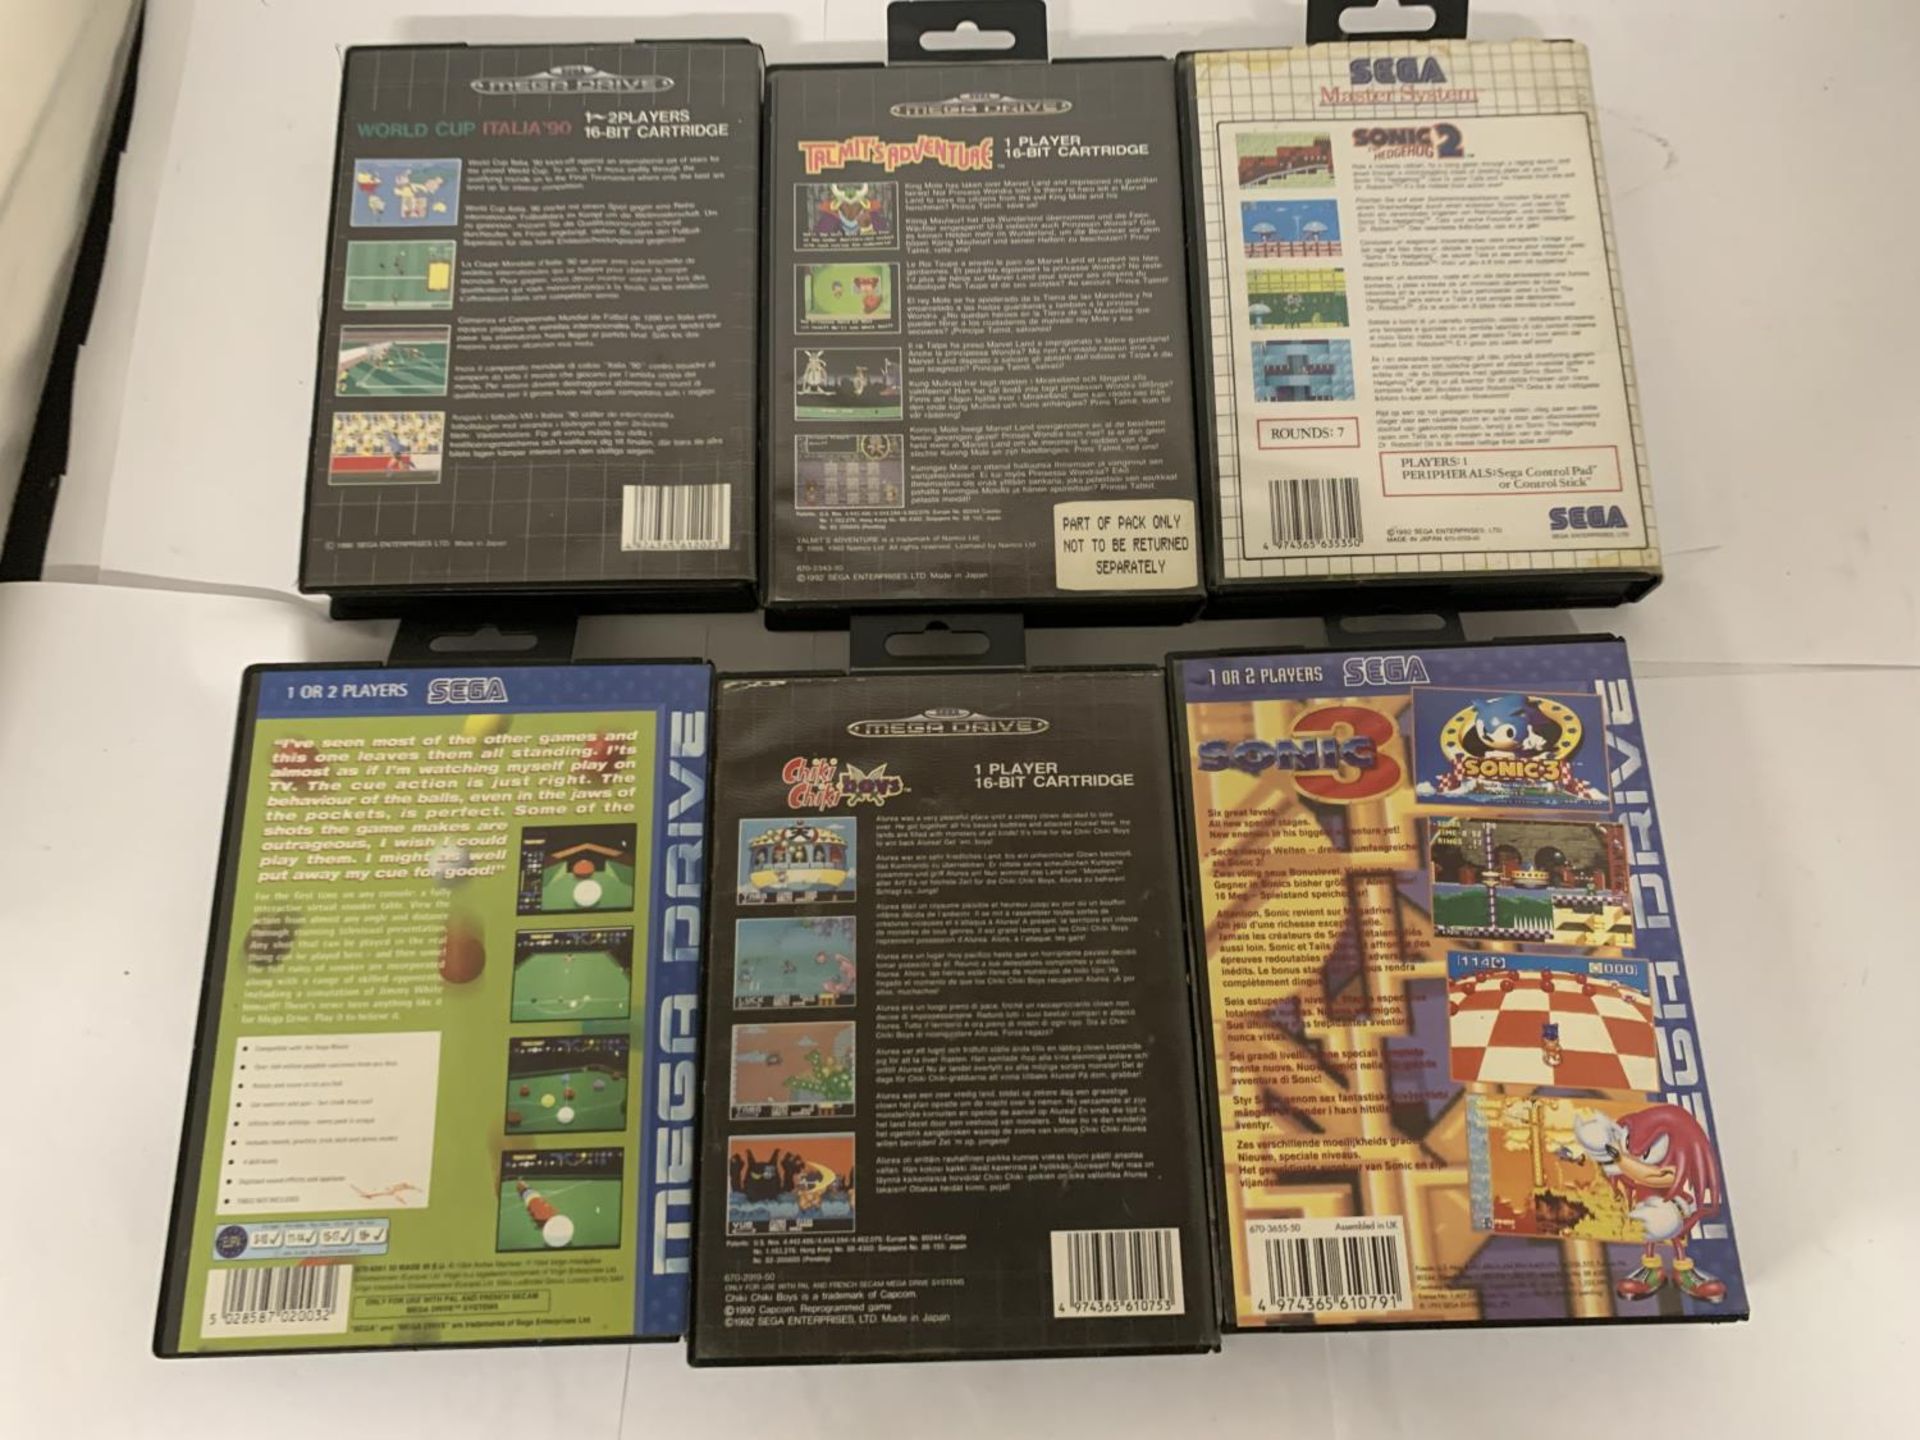 SIX BOXED SEGA GAMES TO INCLUDE SONIC THE HEDGEHOG 2, SONIC 3, CHICK CHIKI BOYS, ETC., - Image 2 of 5